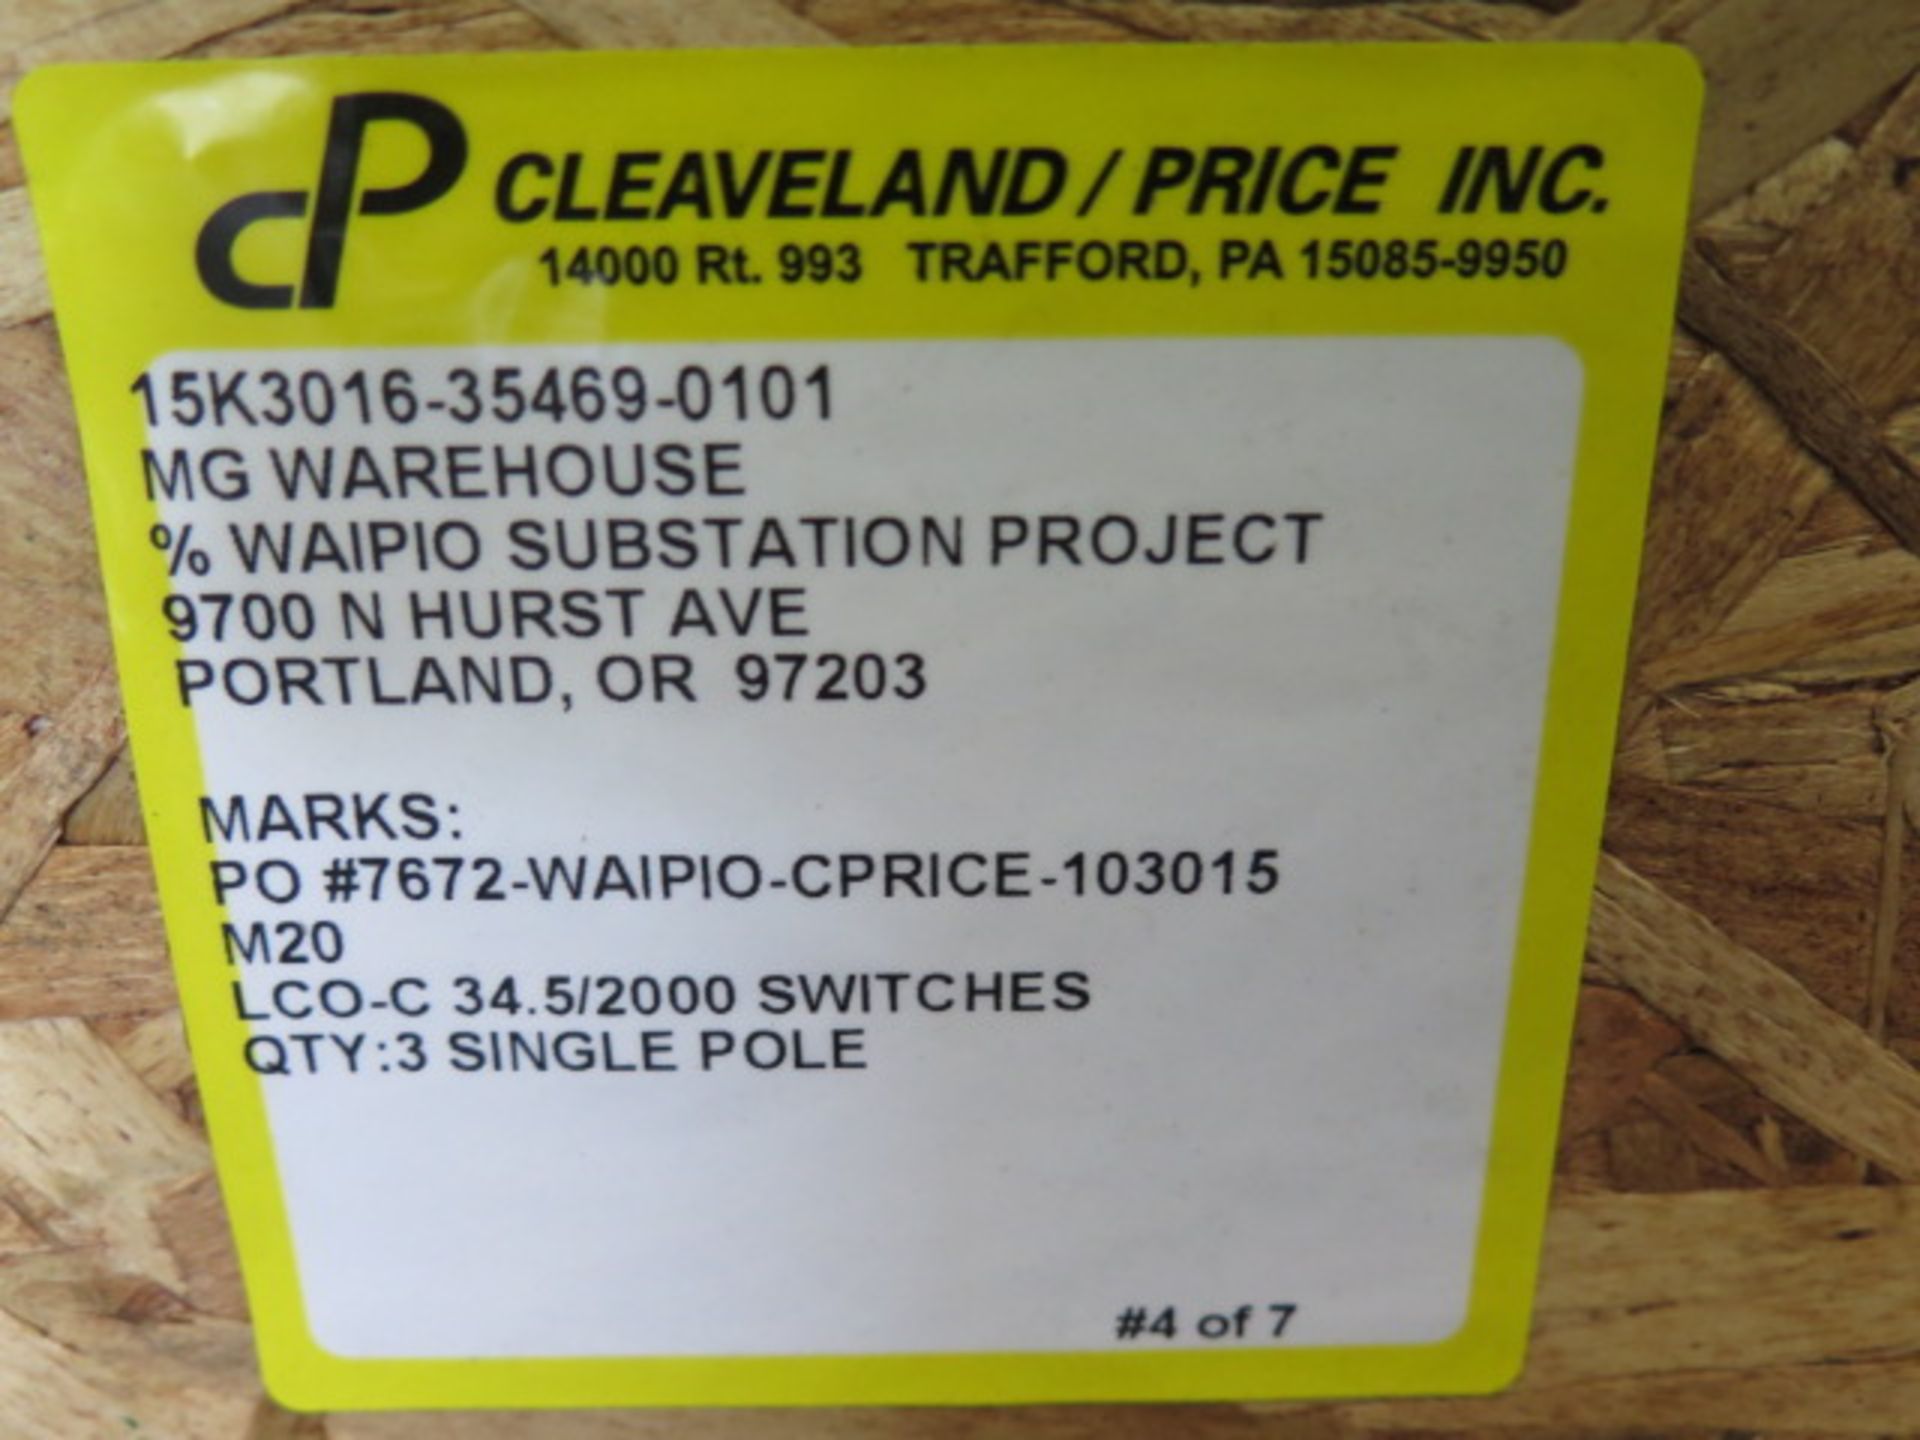 (3) 2016 Cleaveland / Price LCO-C 34.5/2000 Single Pole Disconnection Switches 34.5kV / 2000 Amp - Image 5 of 5